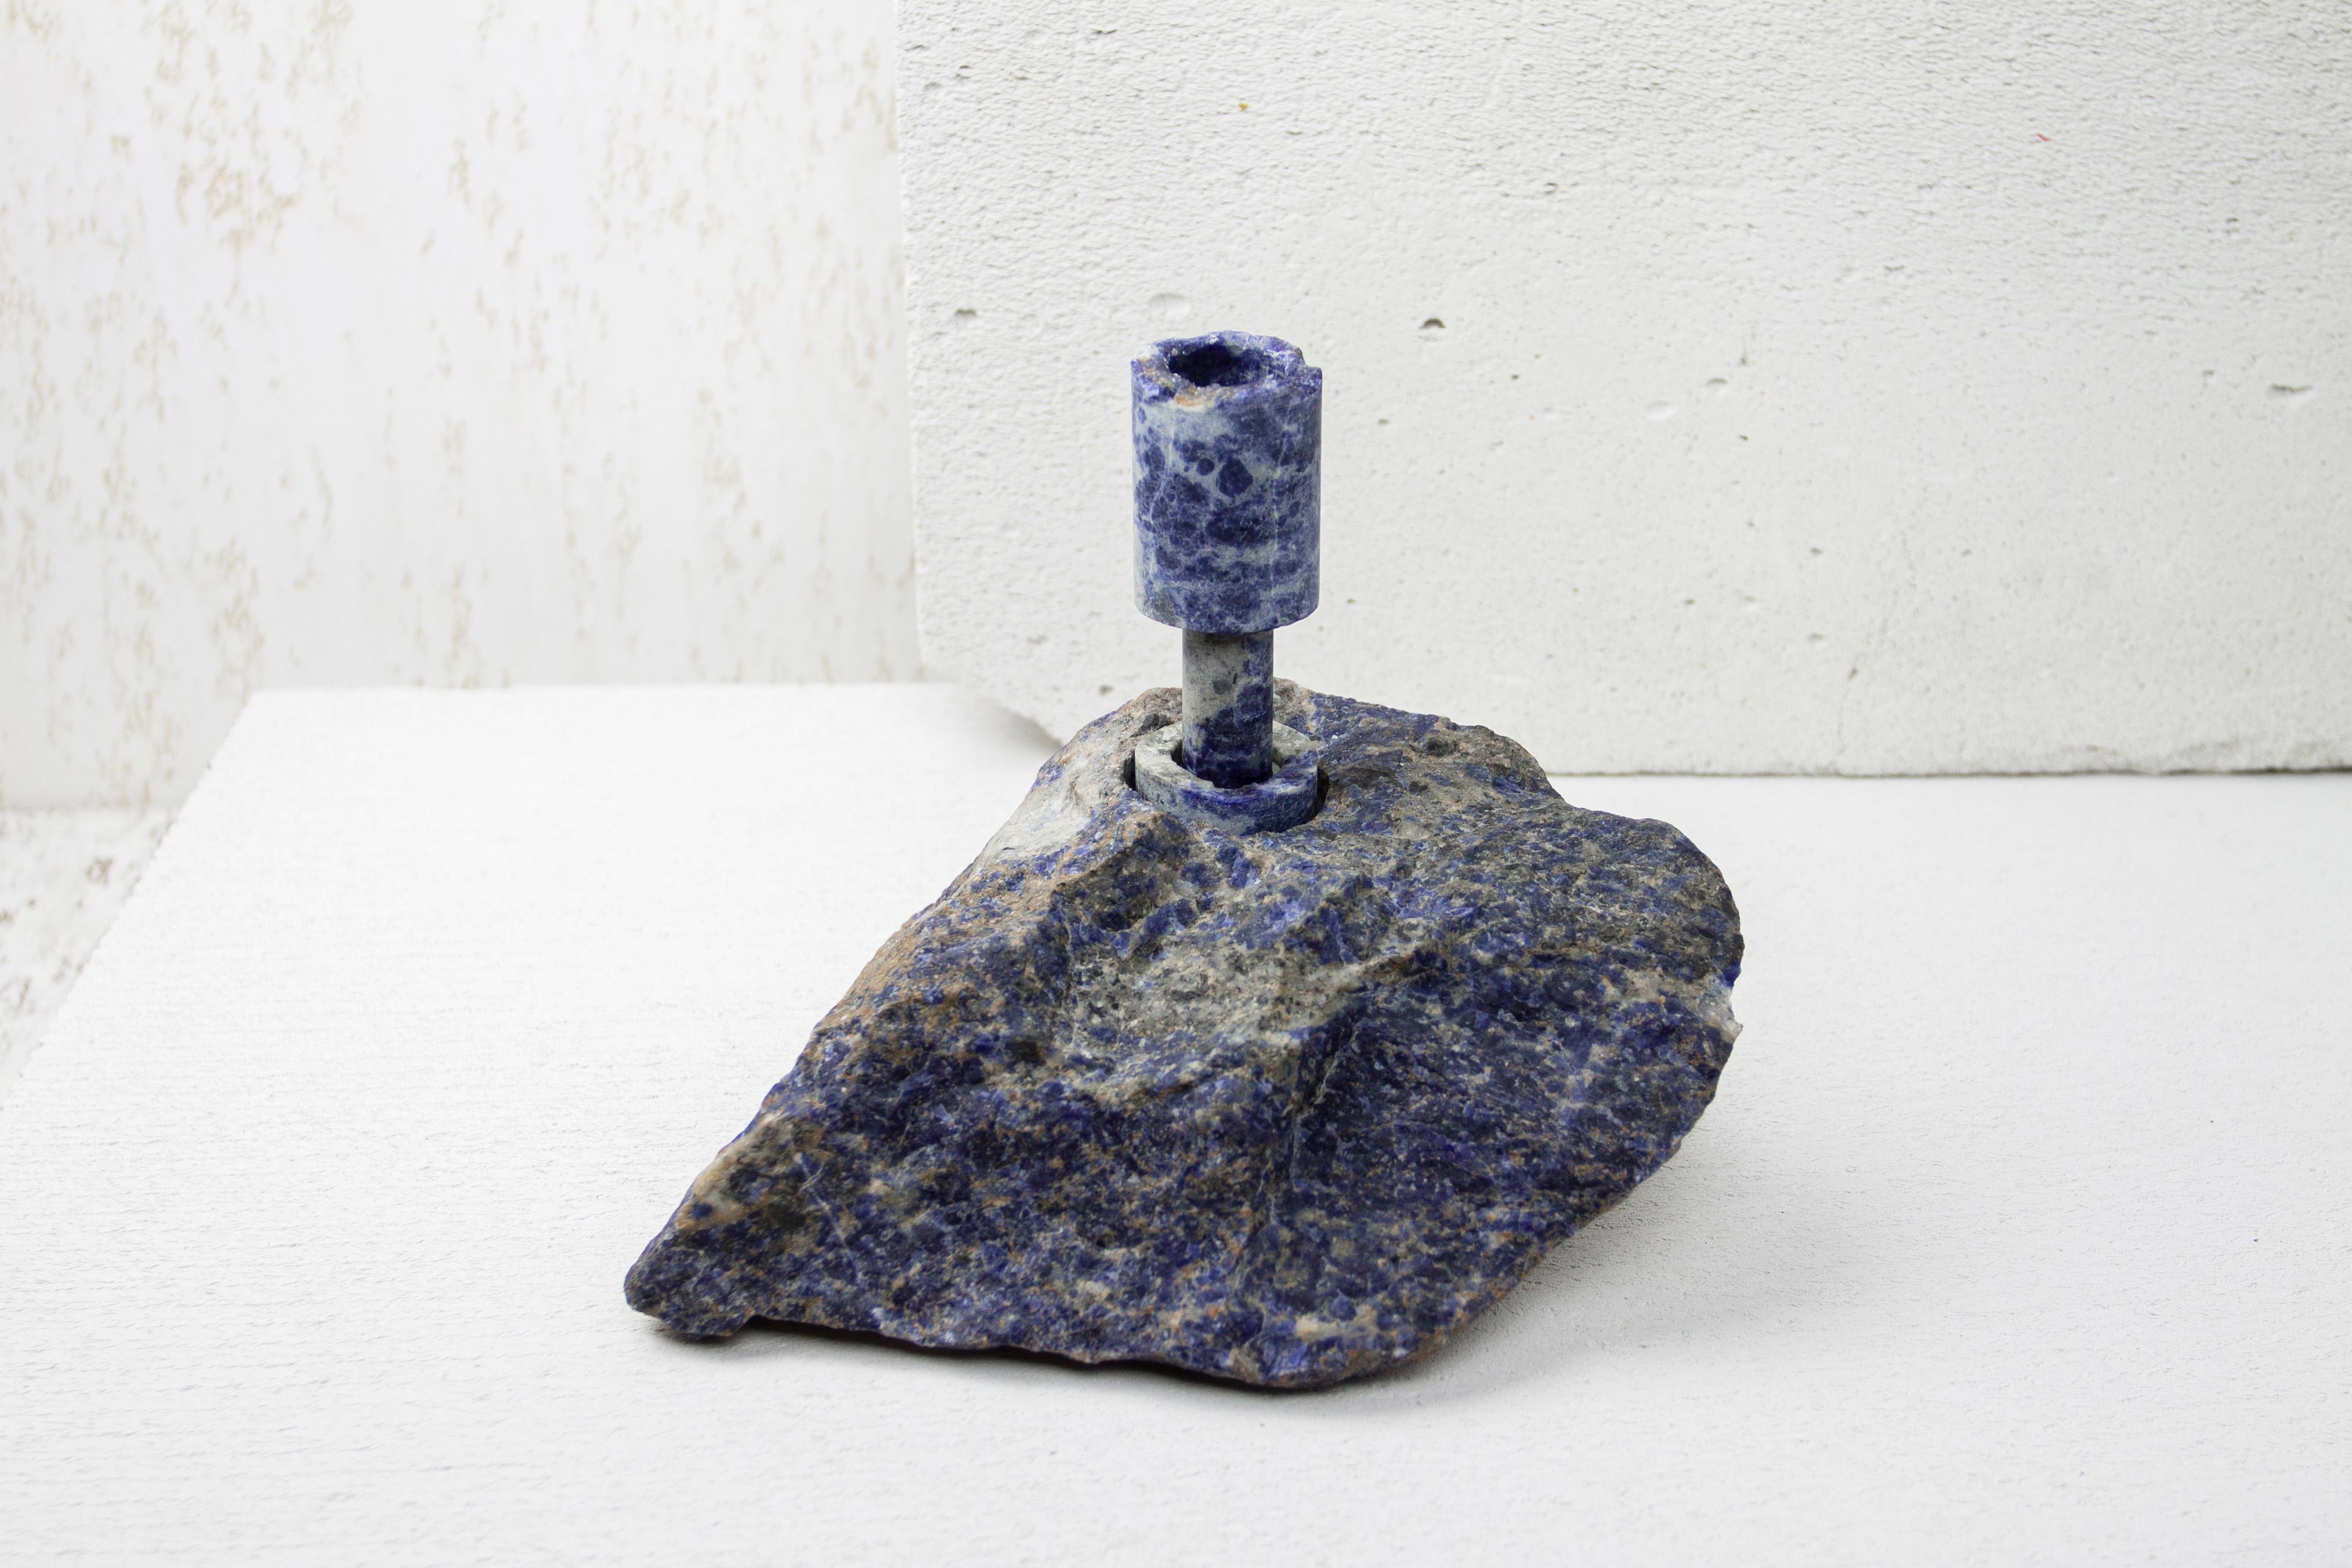 Sodalite Abra Candelabra by Studio DO
Dimensions: D 20 x W 15 x H 17 cm
Materials: Sodalite, aluminum.
2.8 kg.

Stone and fire are connected in an ageless bond. A sparkle created by clashing two stones with each other has been igniting fire over